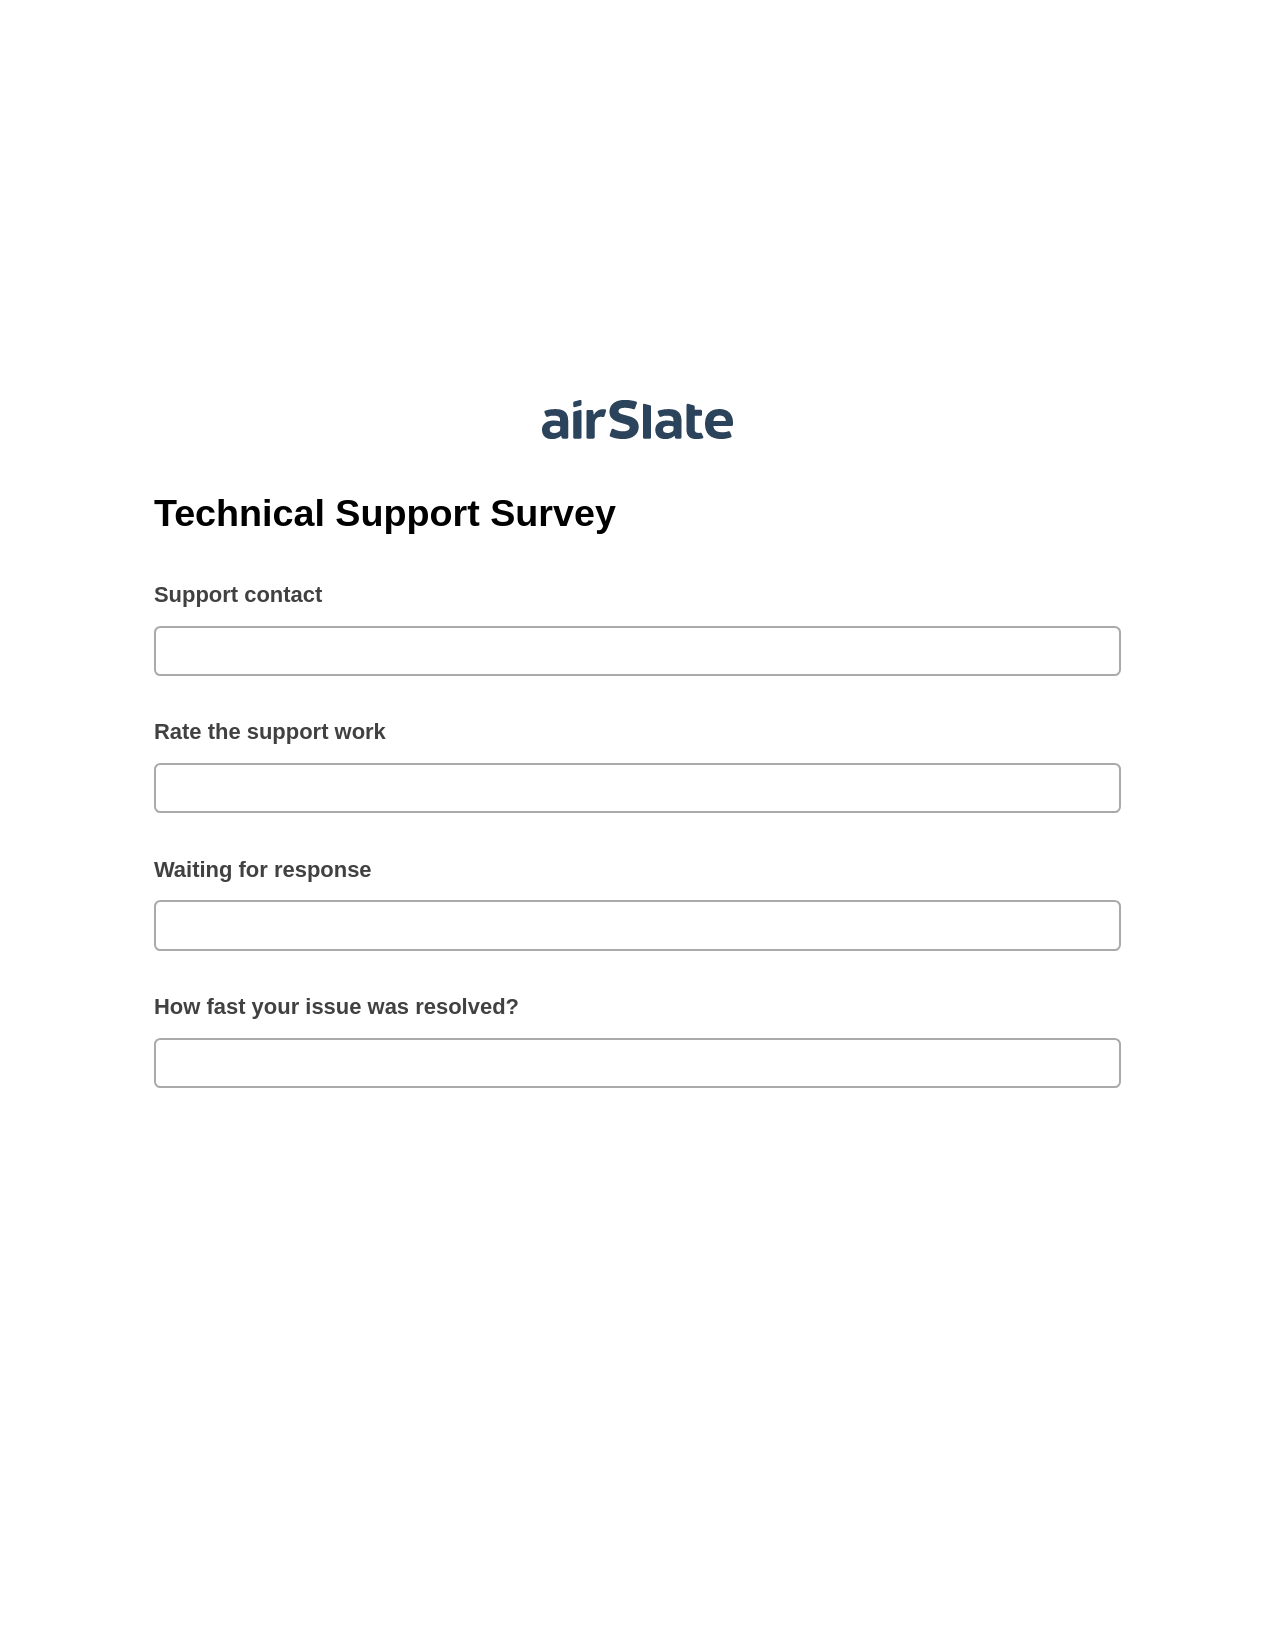 Multirole Technical Support Survey Pre-fill from CSV File Bot, Add Tags to Slate Bot, Archive to Box Bot